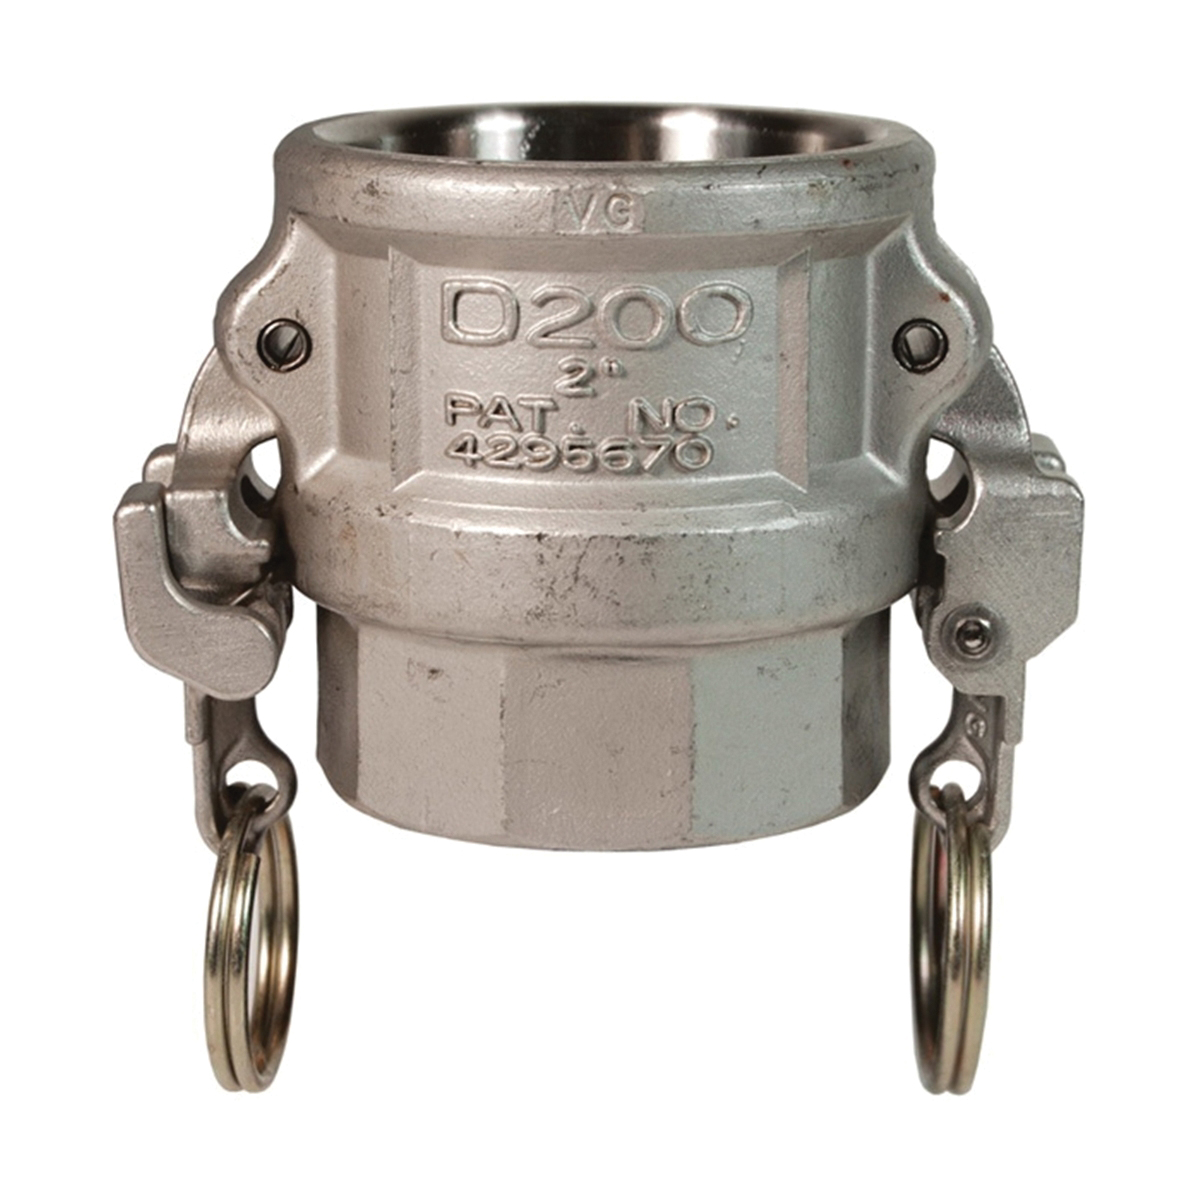 DIXON RD300EZ Type D Cam and Groove Coupling, 3 in Fitting, Coupler x FNPT Connection, 316 Stainless Steel